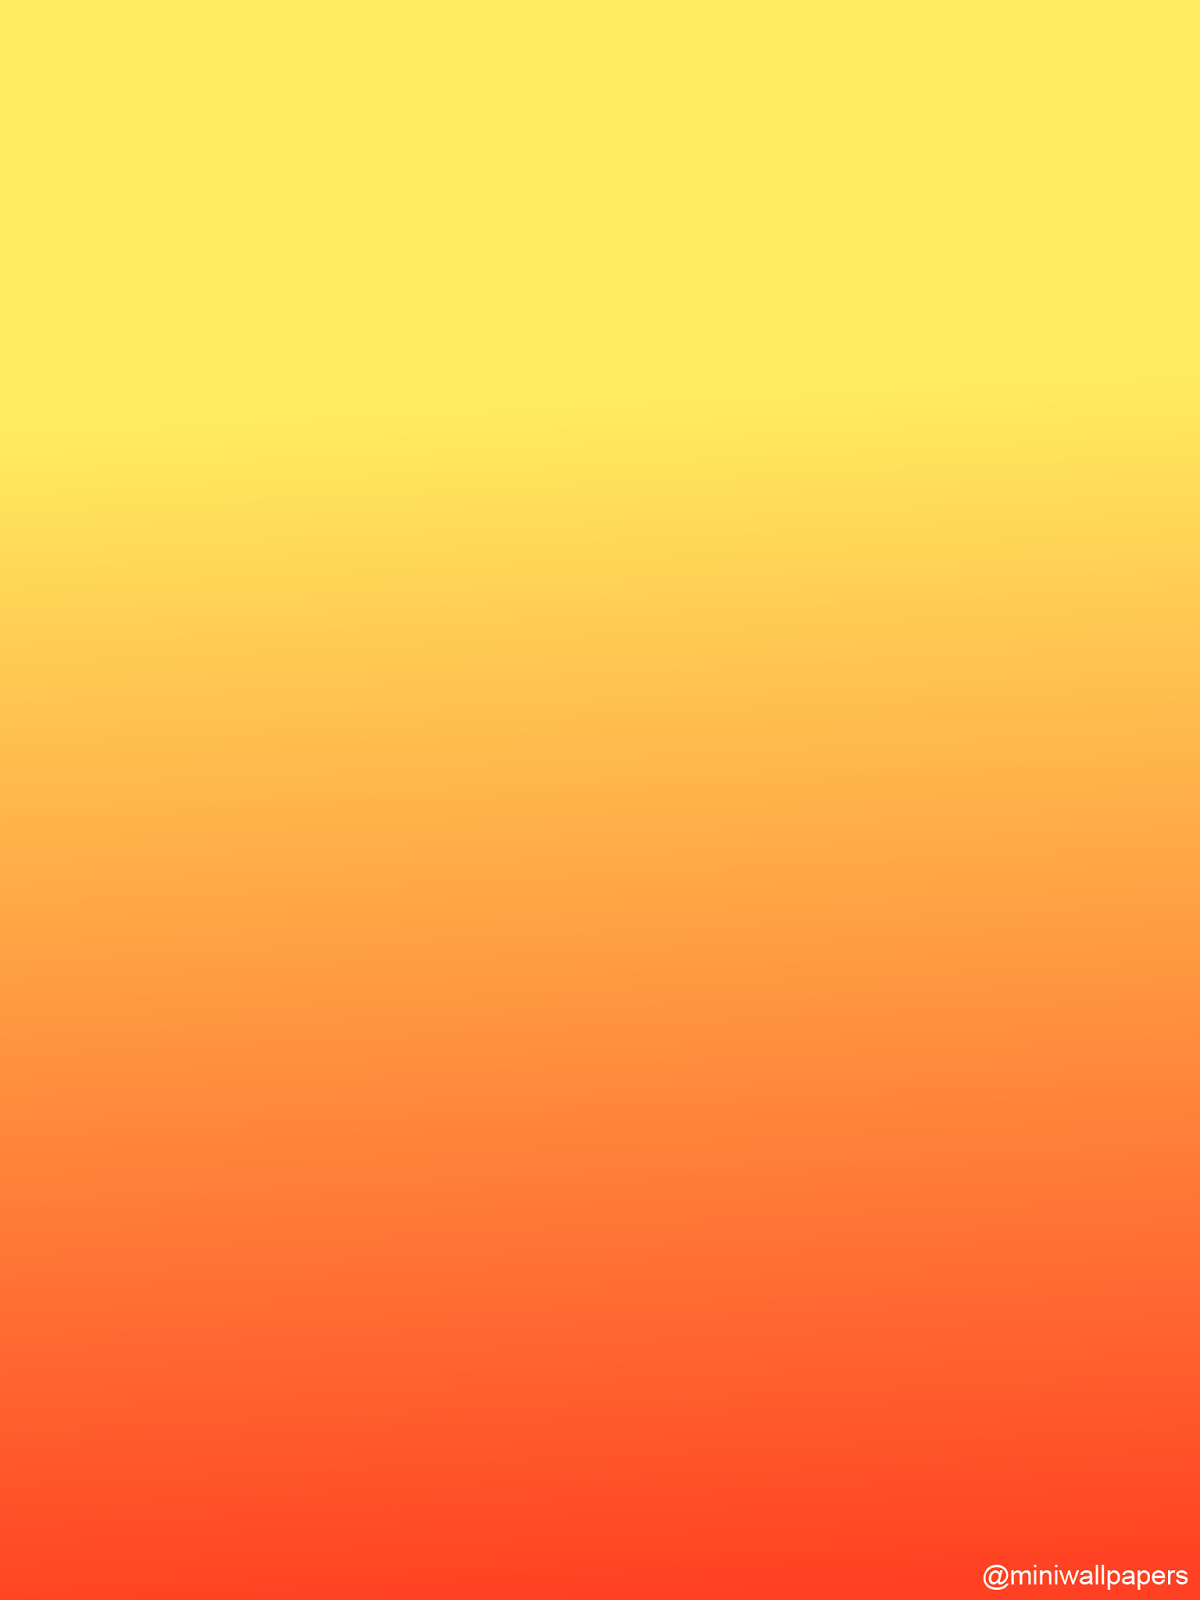 orange and yellow gradient wallpapers wallpaper cave on orange and yellow gradient wallpapers